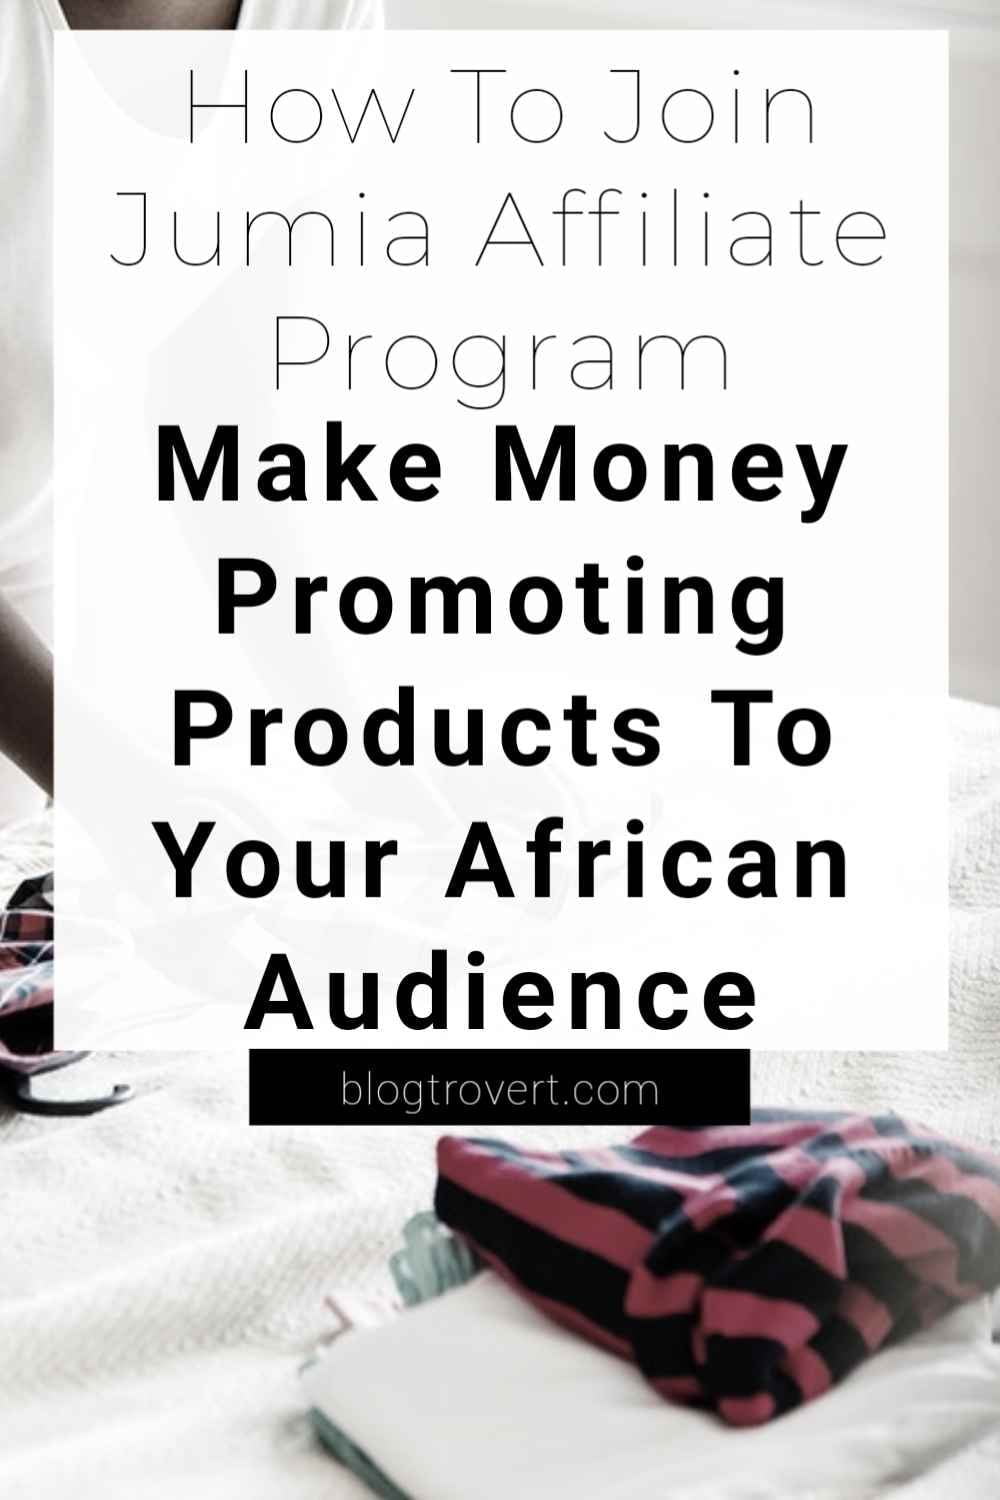 How to join Jumia affiliate program - a step-by-step guide 2